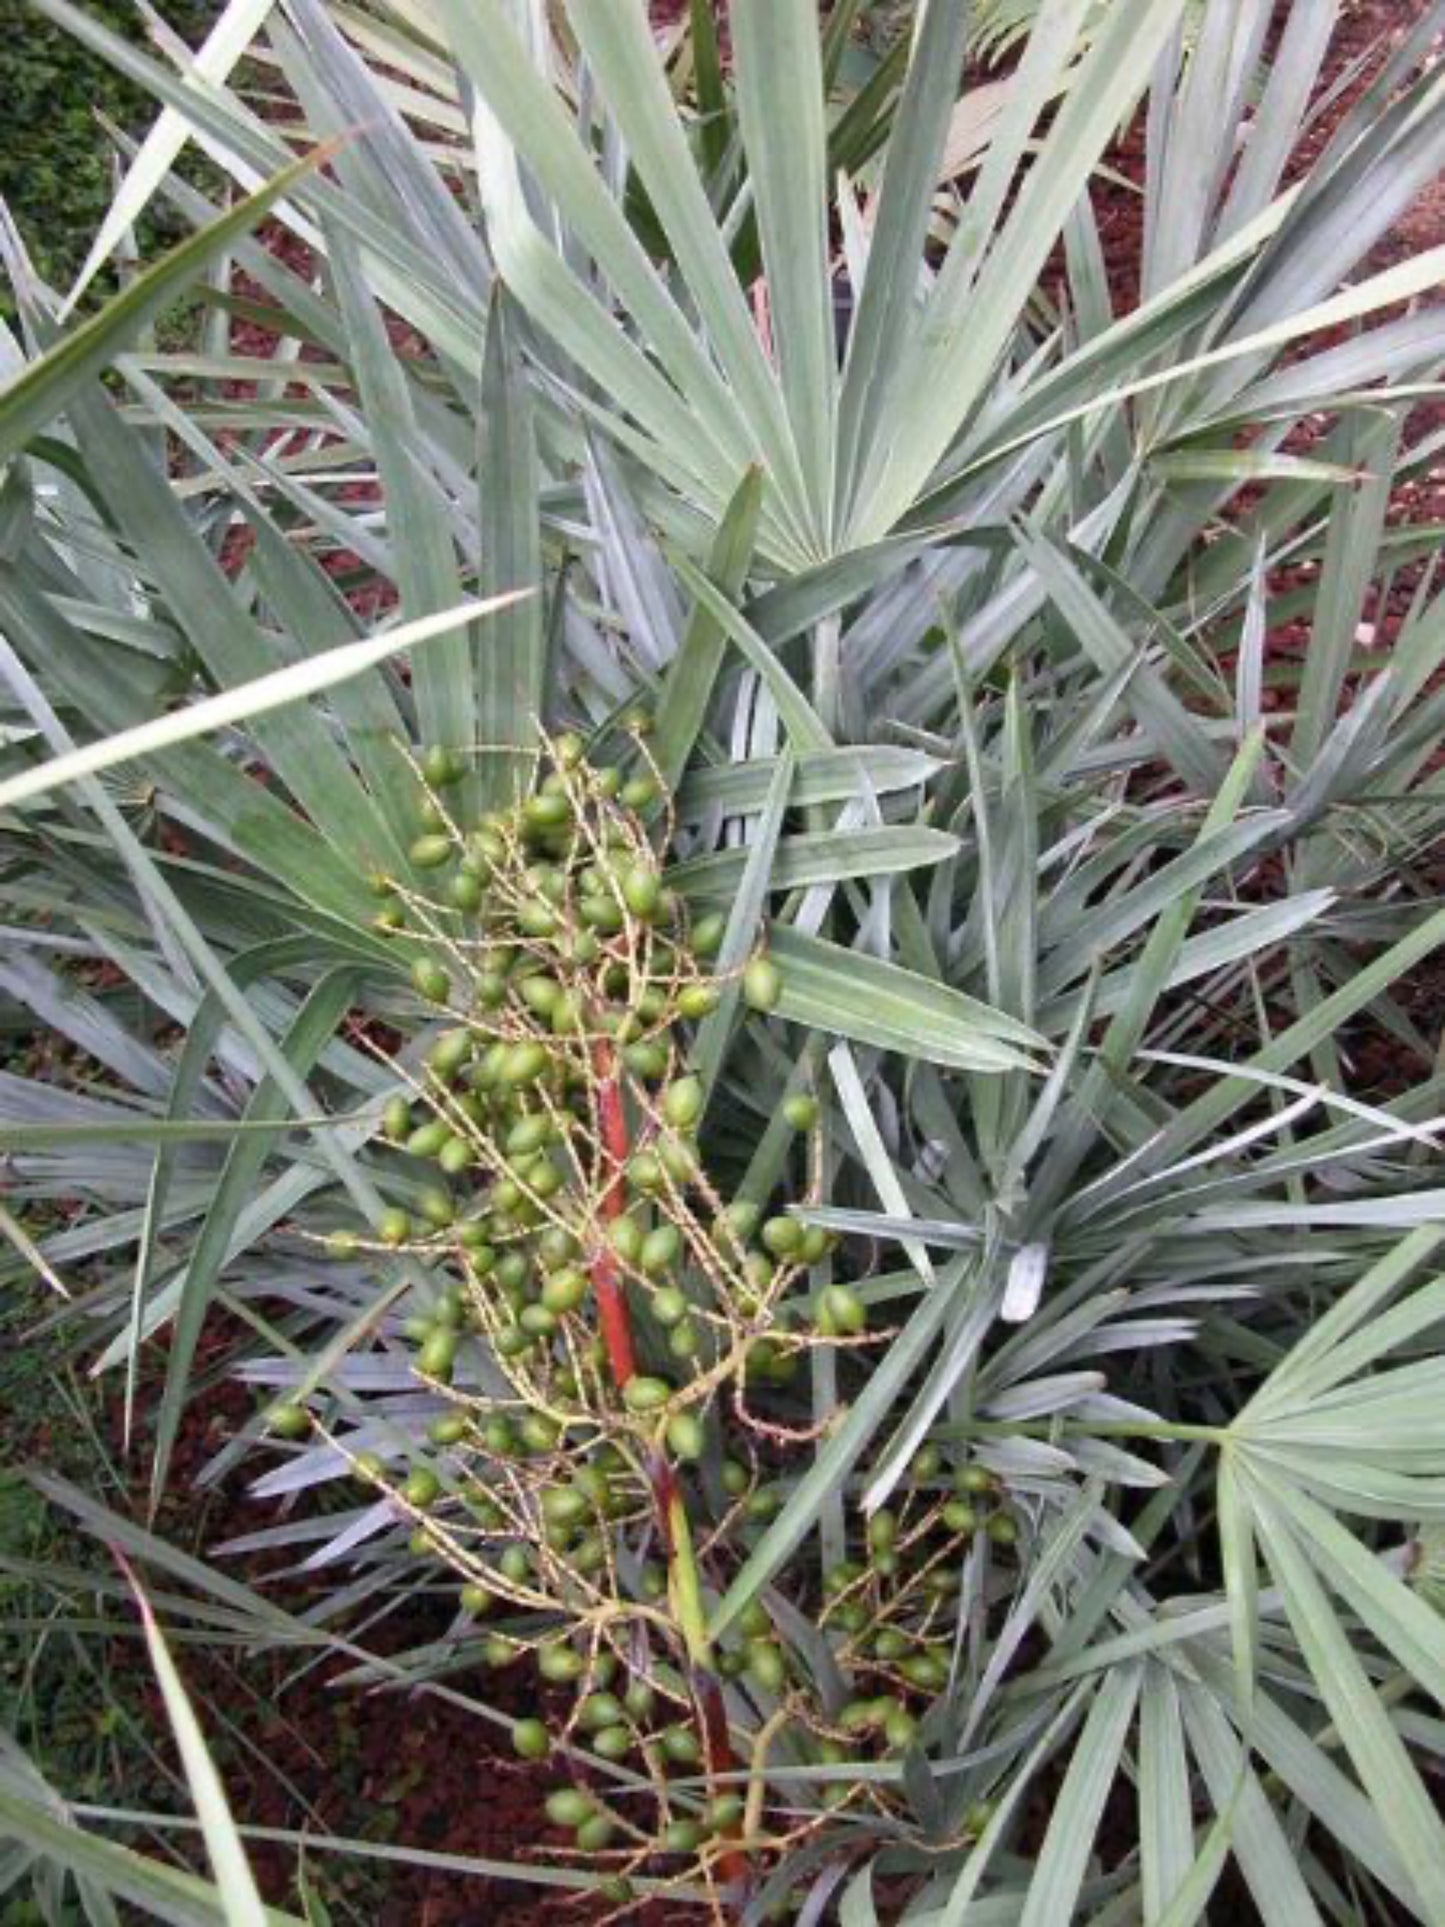 silver saw palmetto is the host plant for Palmento Skipper butterfly